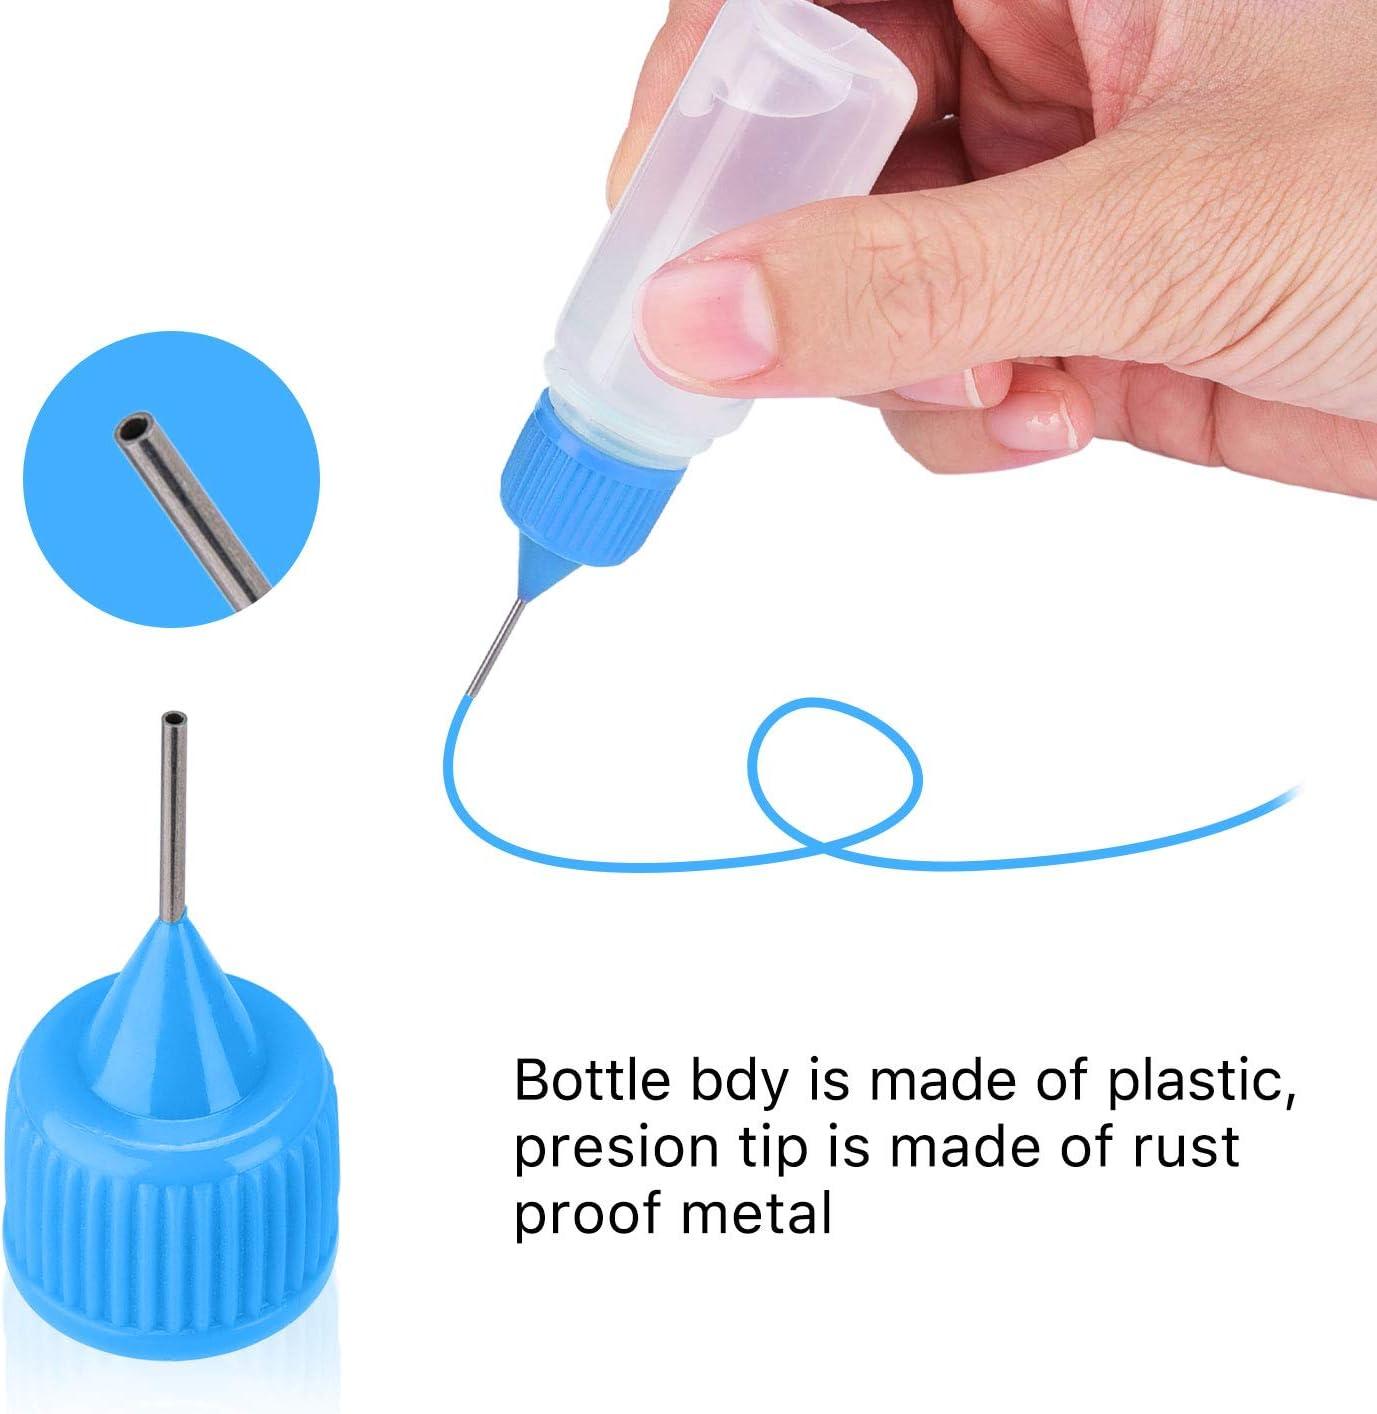 Needle Tip Glue Bottle,precision Tip Applicator Bottle, Plastic Dropper  Bottles For Small Gluing Projects, Paper Quilling Diy Craft, Glue  Applicator Bottles For Acrylic Painting, Quilling, Alcohol Ink( With 2  Plastic Funnels) For